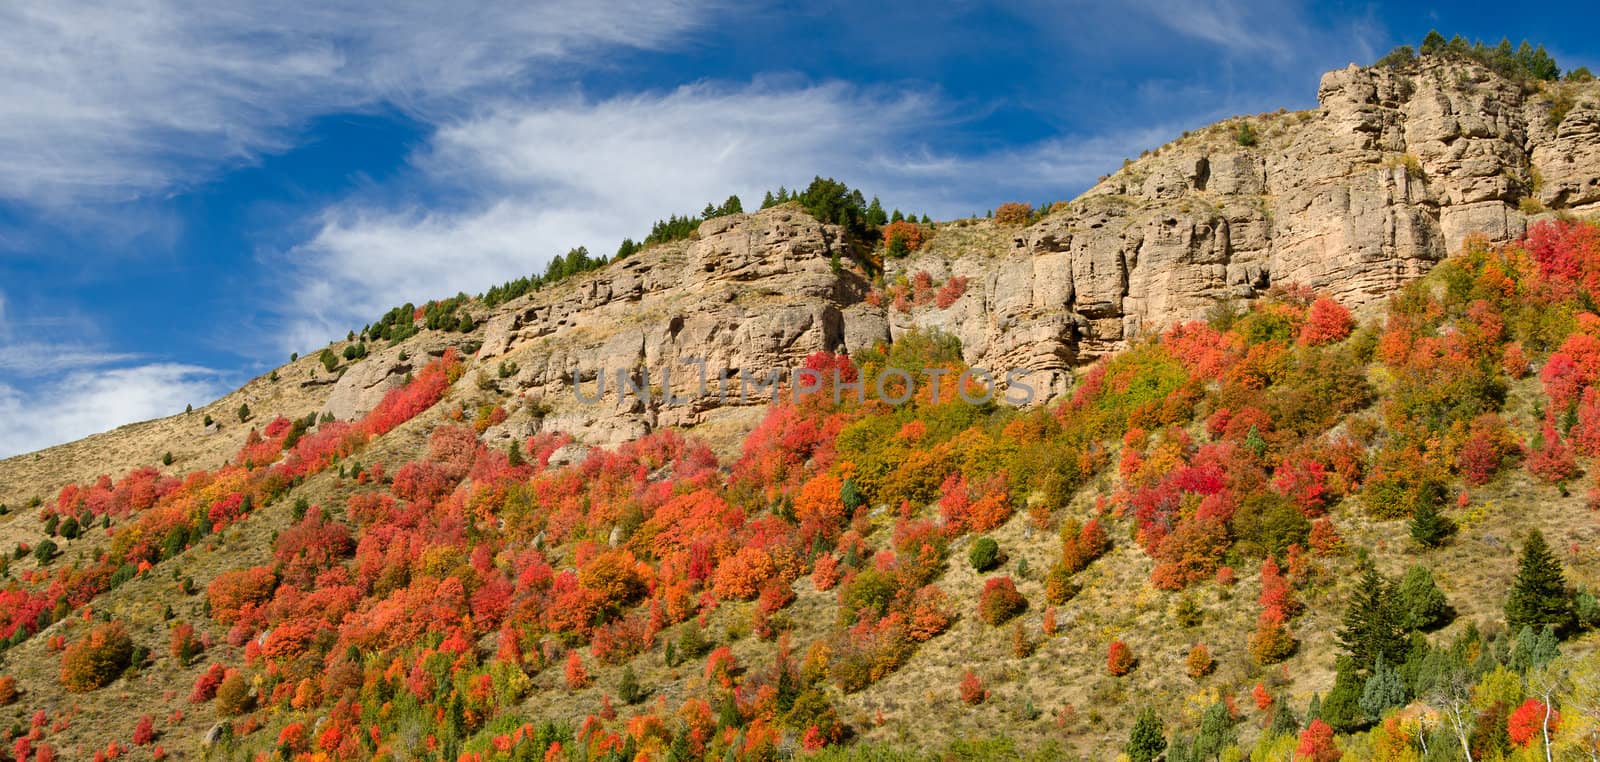 Autumn maples and cliffs, Targhee National Forest, Idaho, USA by CharlesBolin